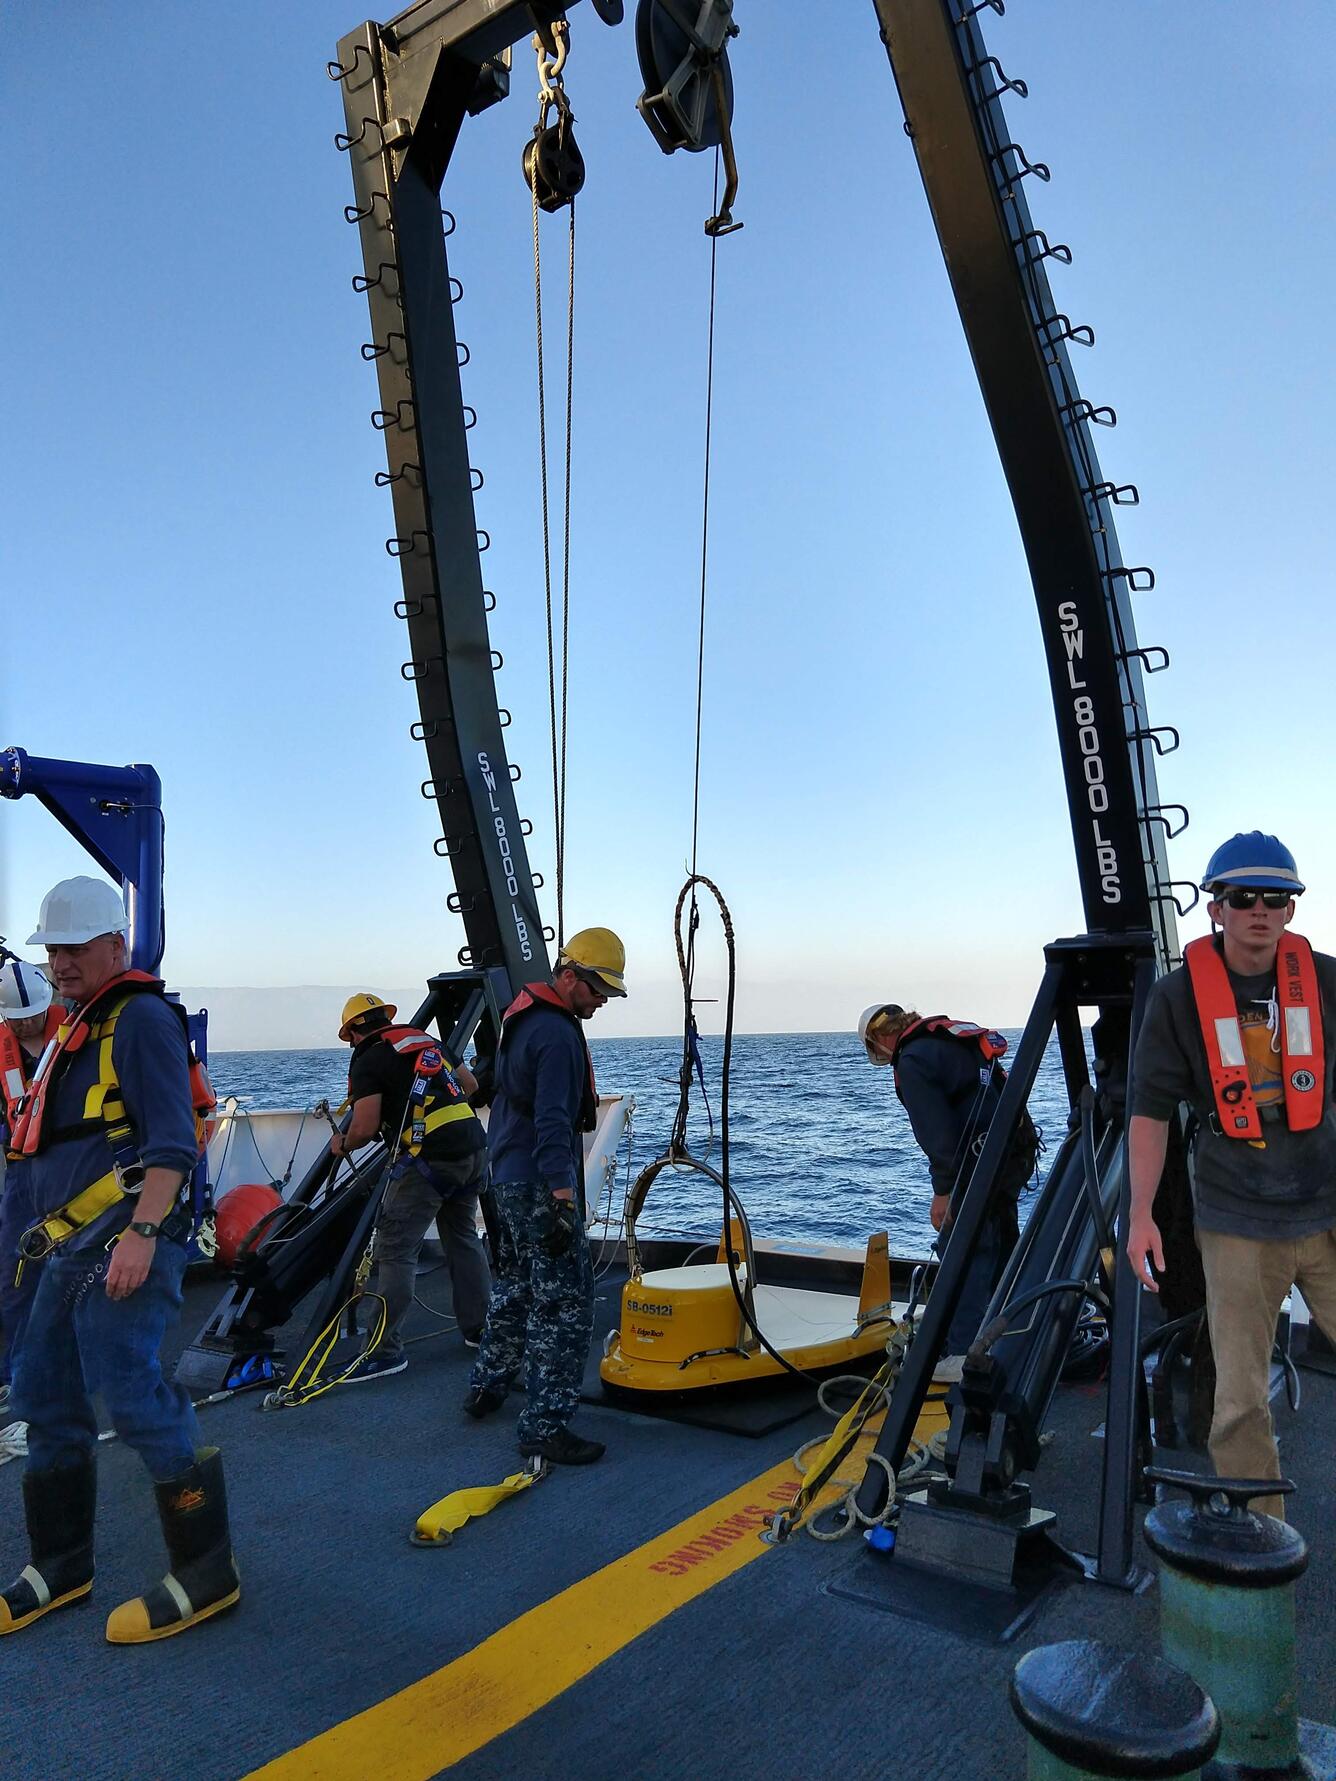 A group stands on the stern of a ship preparing an instrument attached to a cabling system.